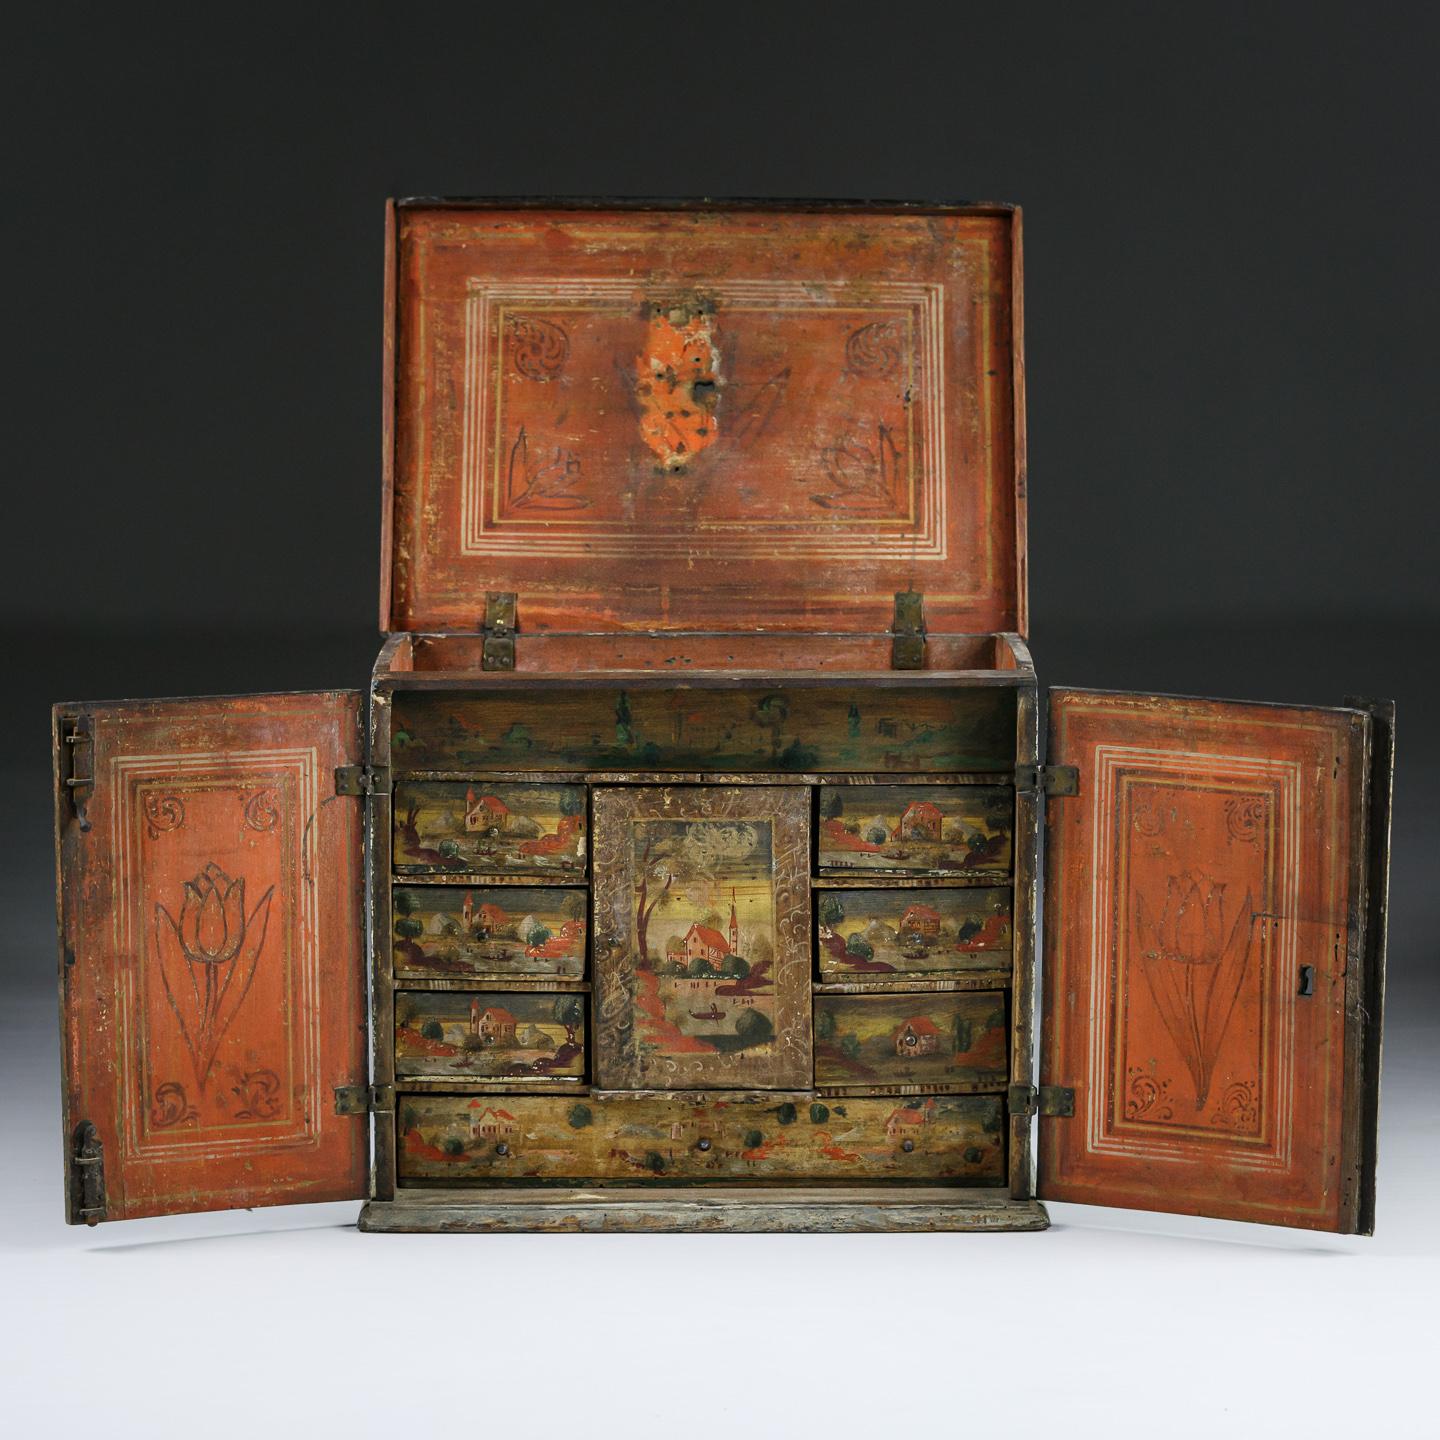 Painted Extraordinary Early 18th Century Necessaire Secrets For Sale